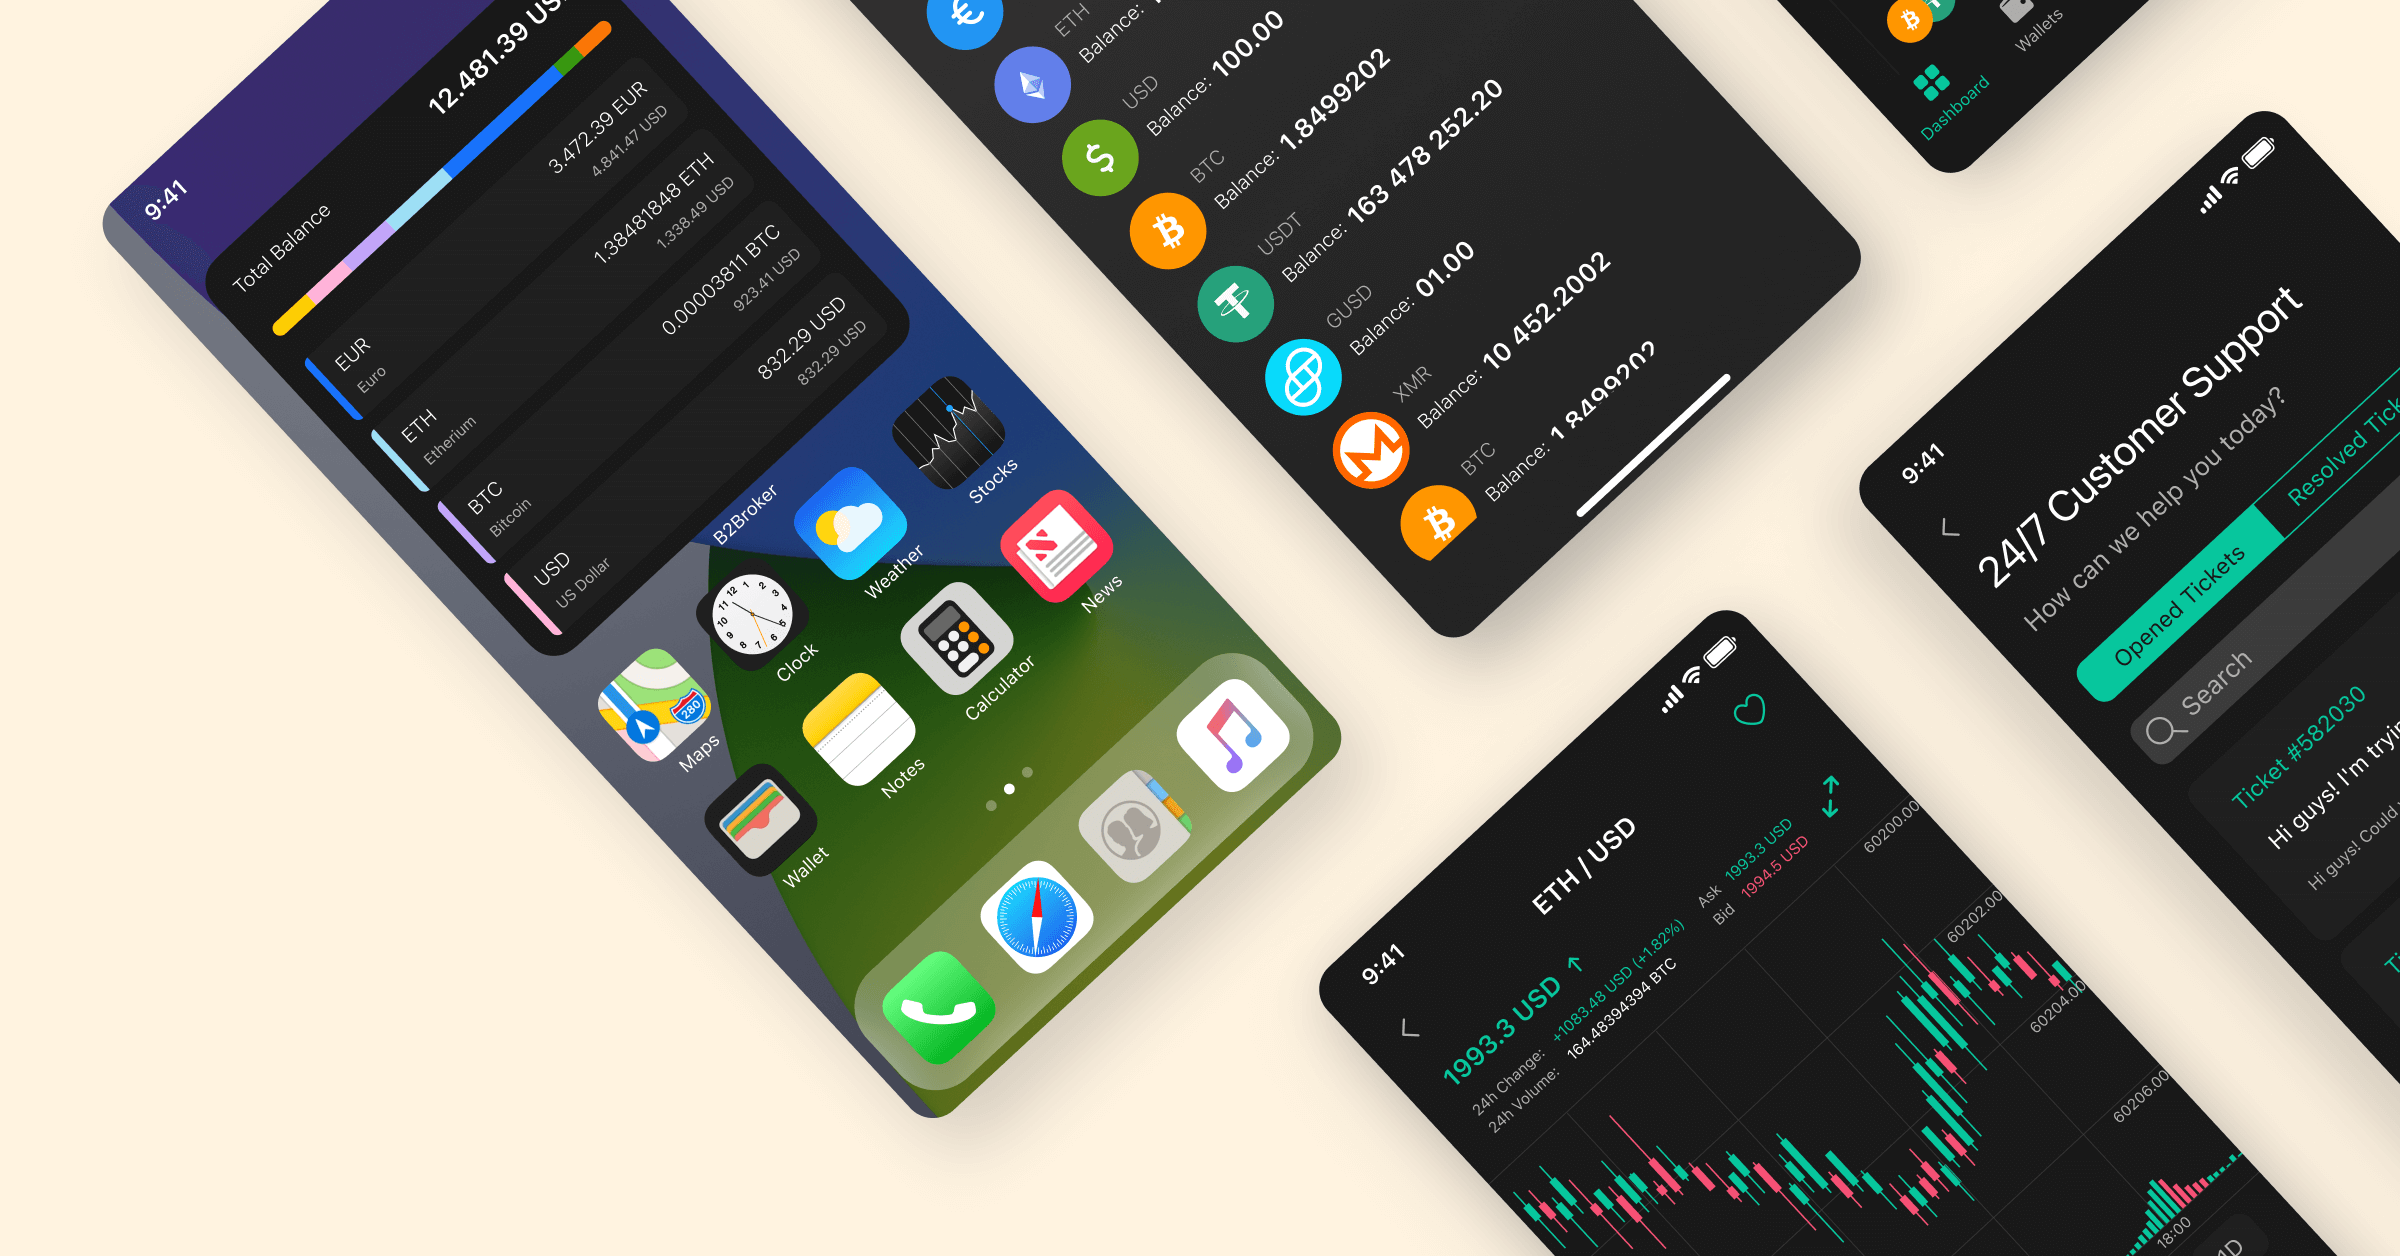 https://liquidity-provider.com/app/uploads/2023/02/match-trader-x-ib-b2core-mobile-are-coming-soon-1.png